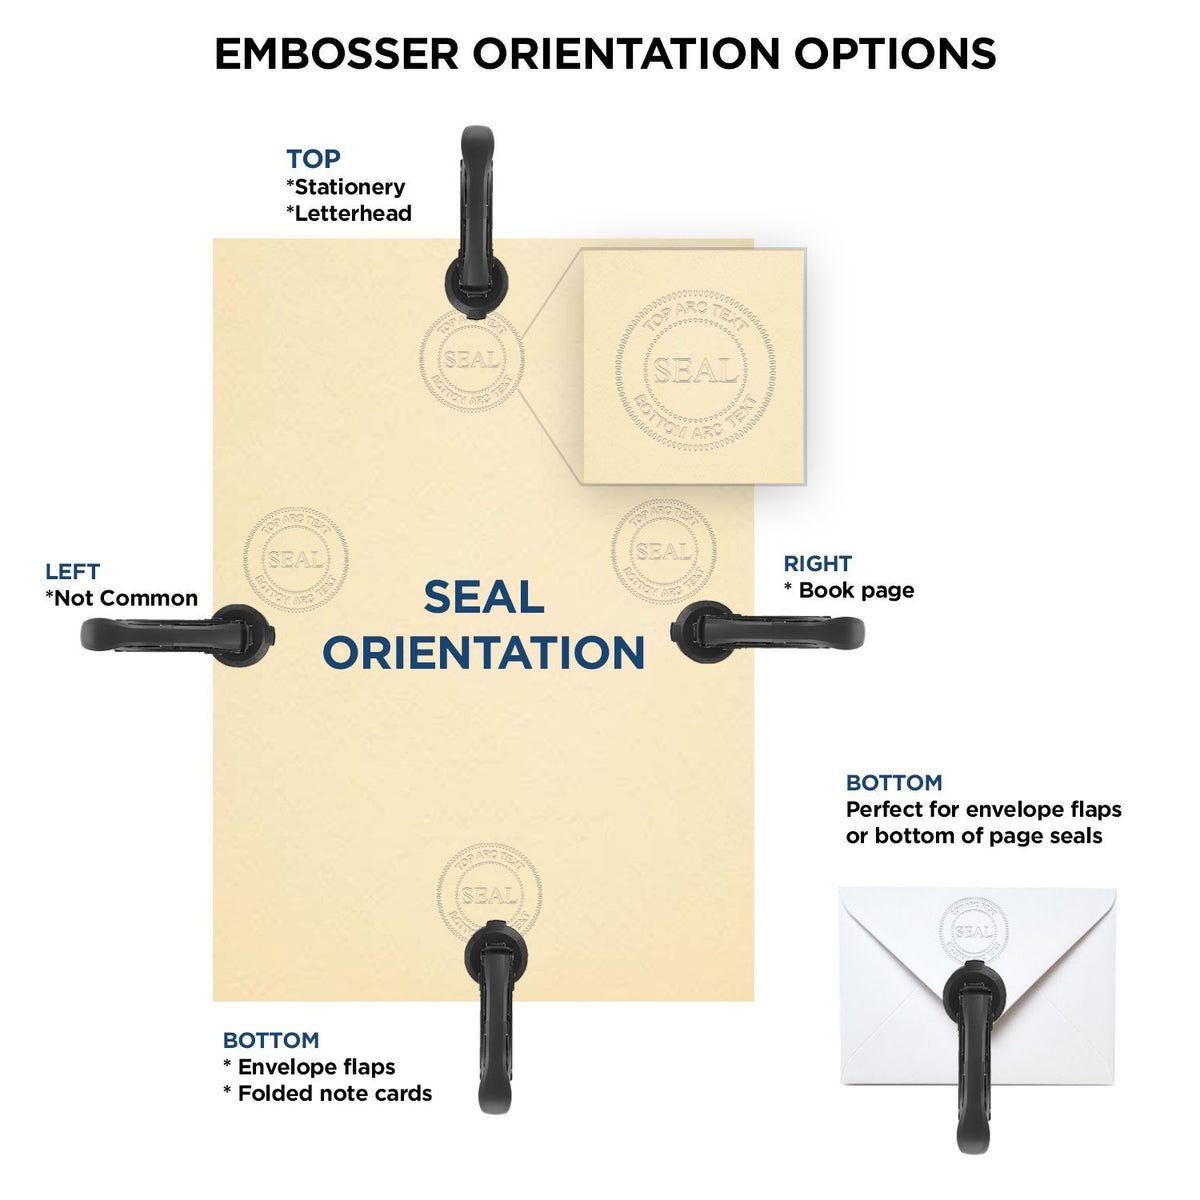 An infographic for the Heavy Duty Cast Iron Kentucky Geologist Seal Embosser showing embosser orientation, this is showing examples of a top, bottom, right and left insert.